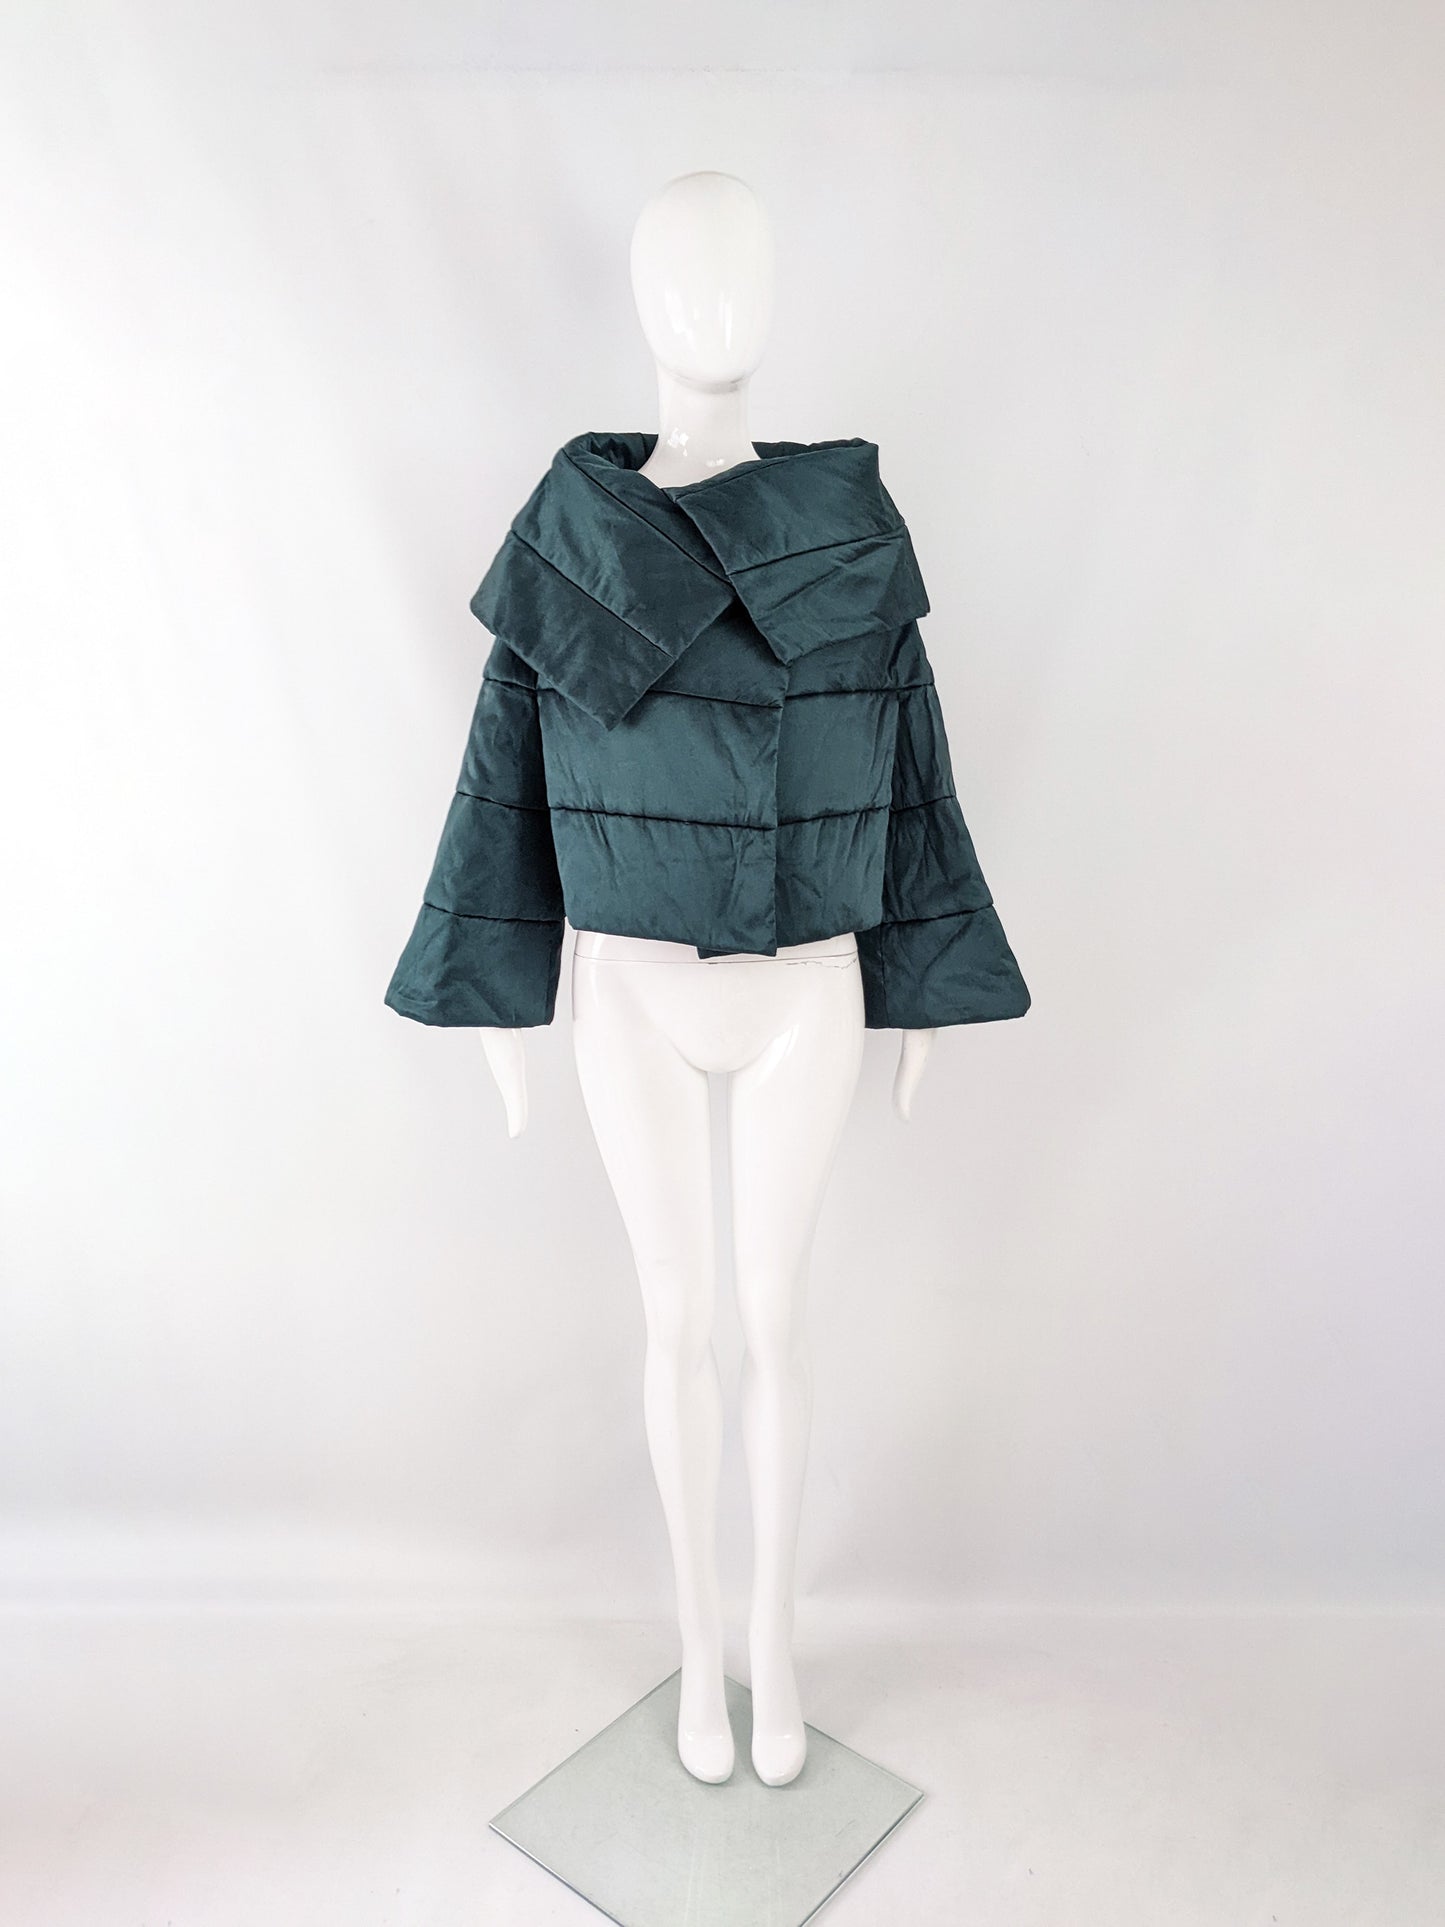 Plein Sud by Faycal Amor Vintage Green Architectural Coat, 1990s